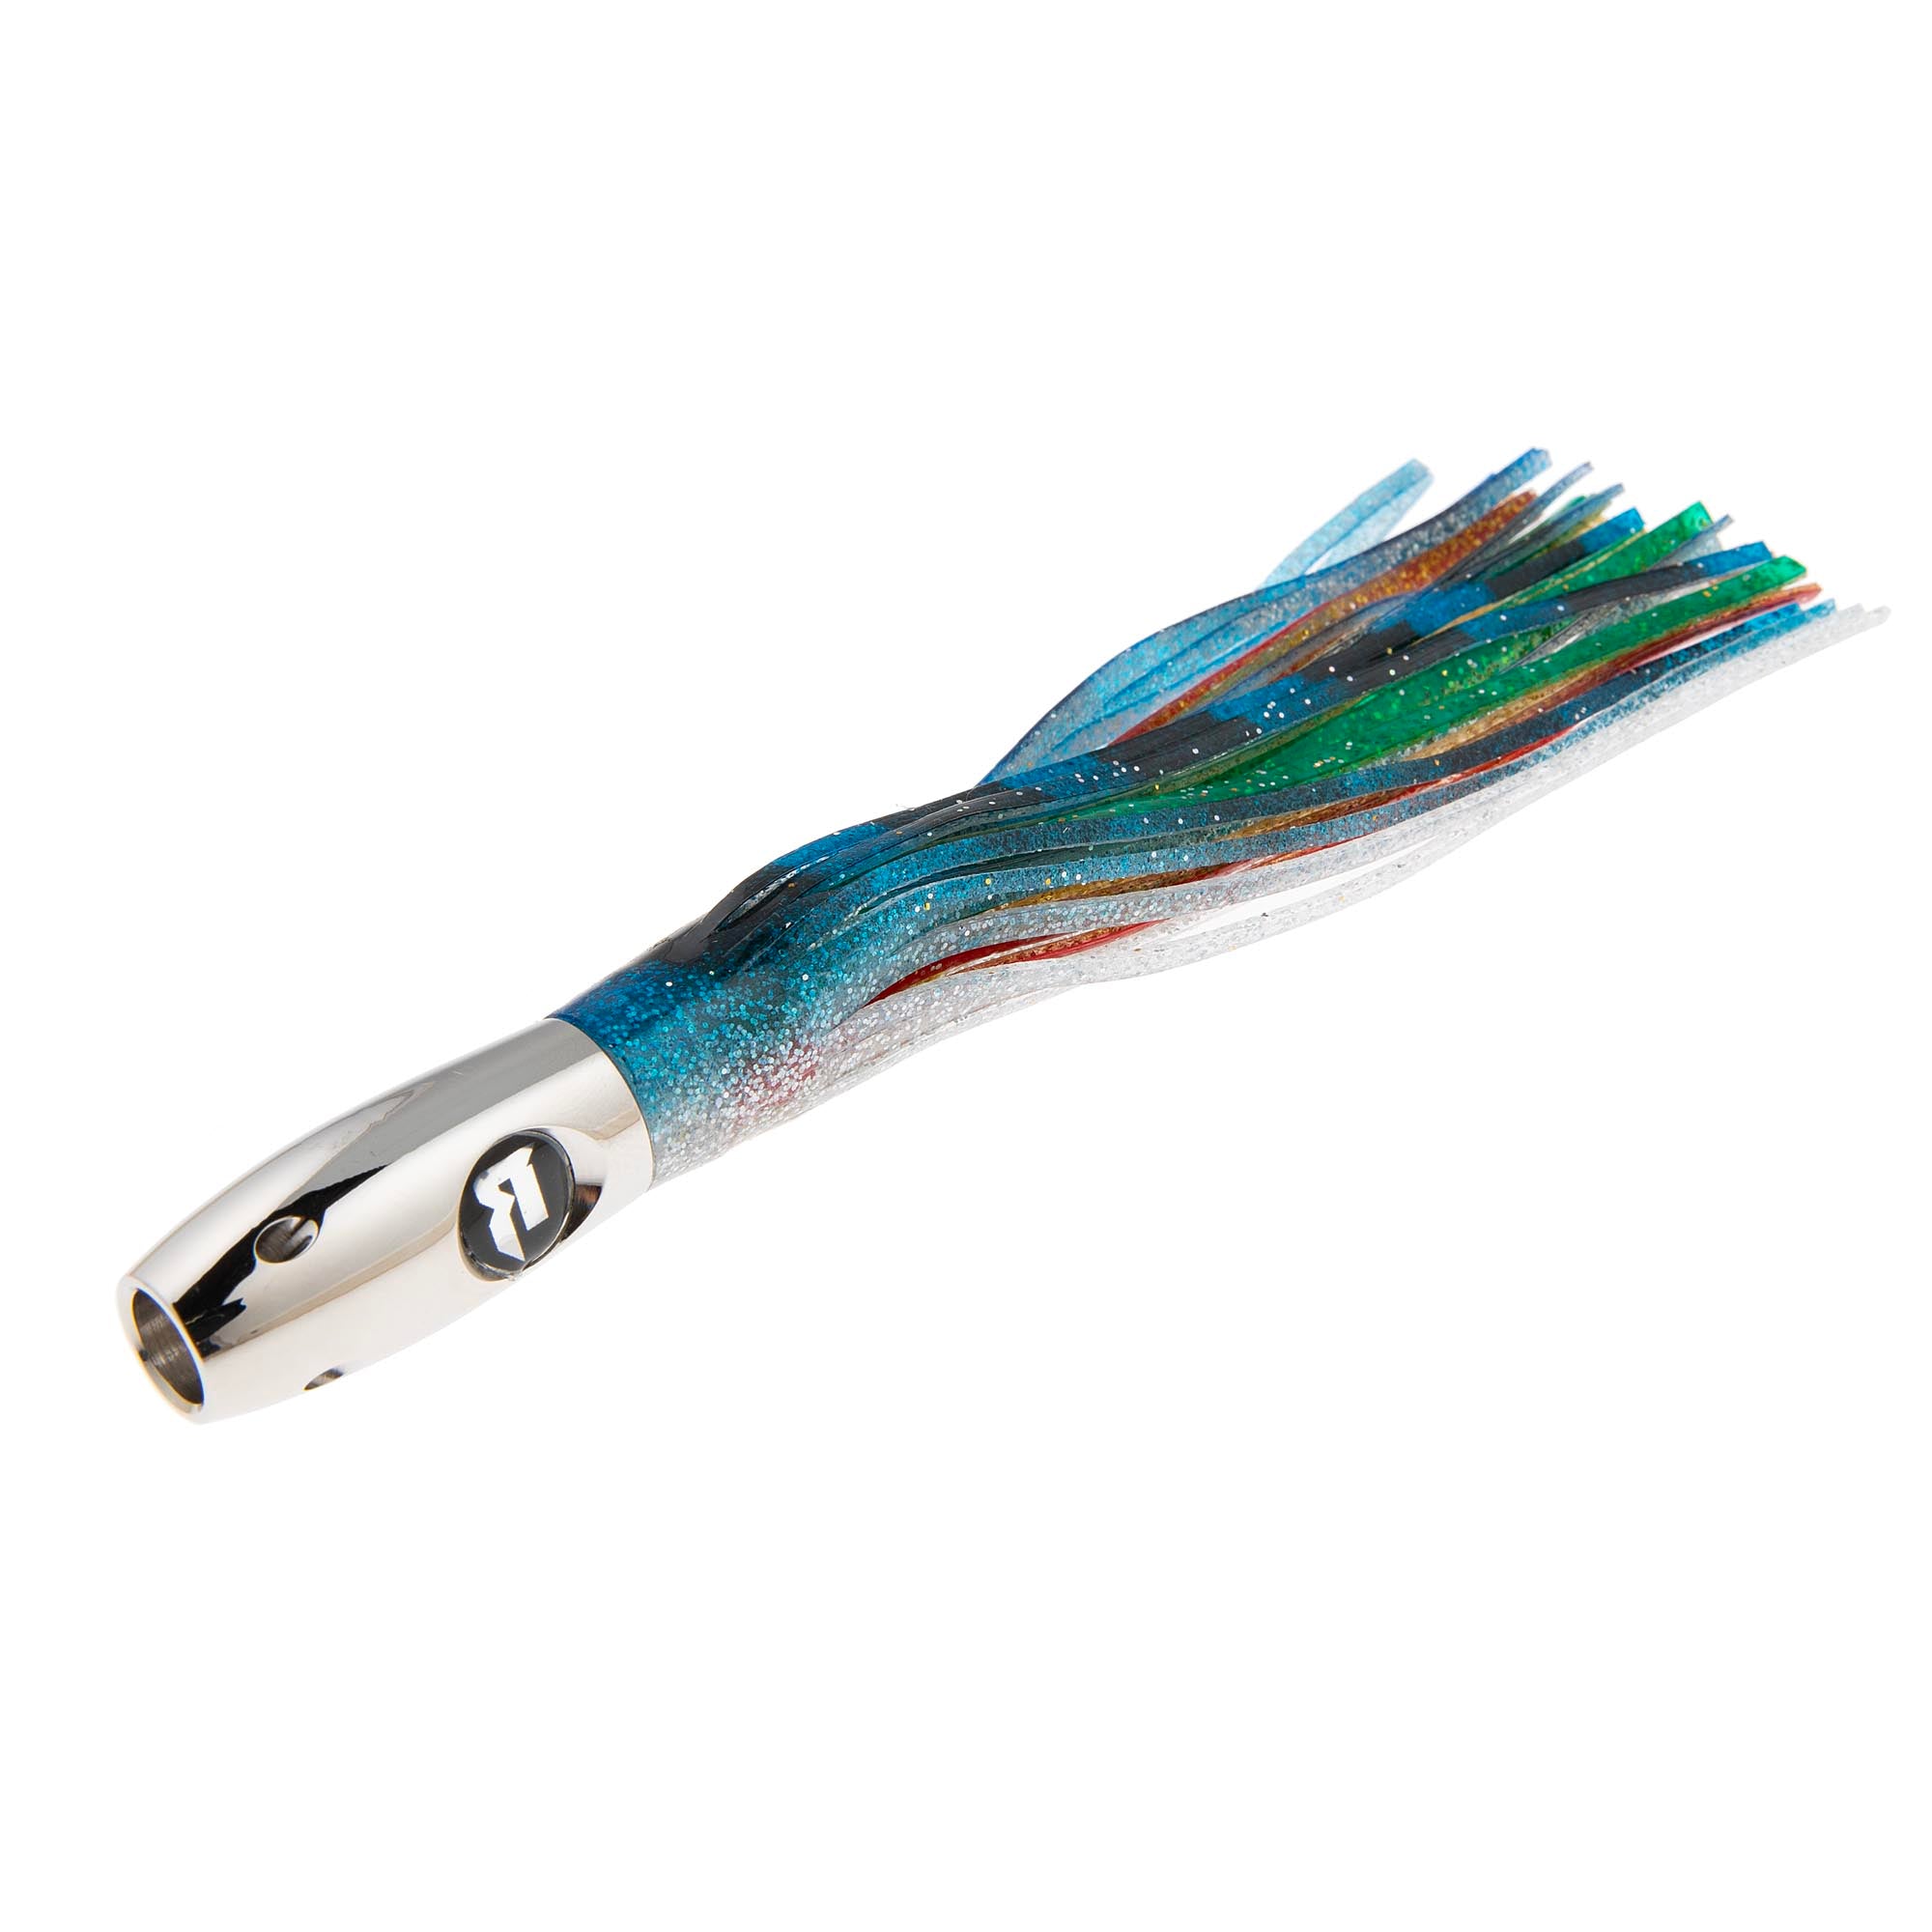 Jet Head Silver Trolling Lure 10.5 Inch CT42S6H2 [CT42S6H2] - $18.99 :  ebasicpower.com, Marine Engine Parts, Fishing Tackle